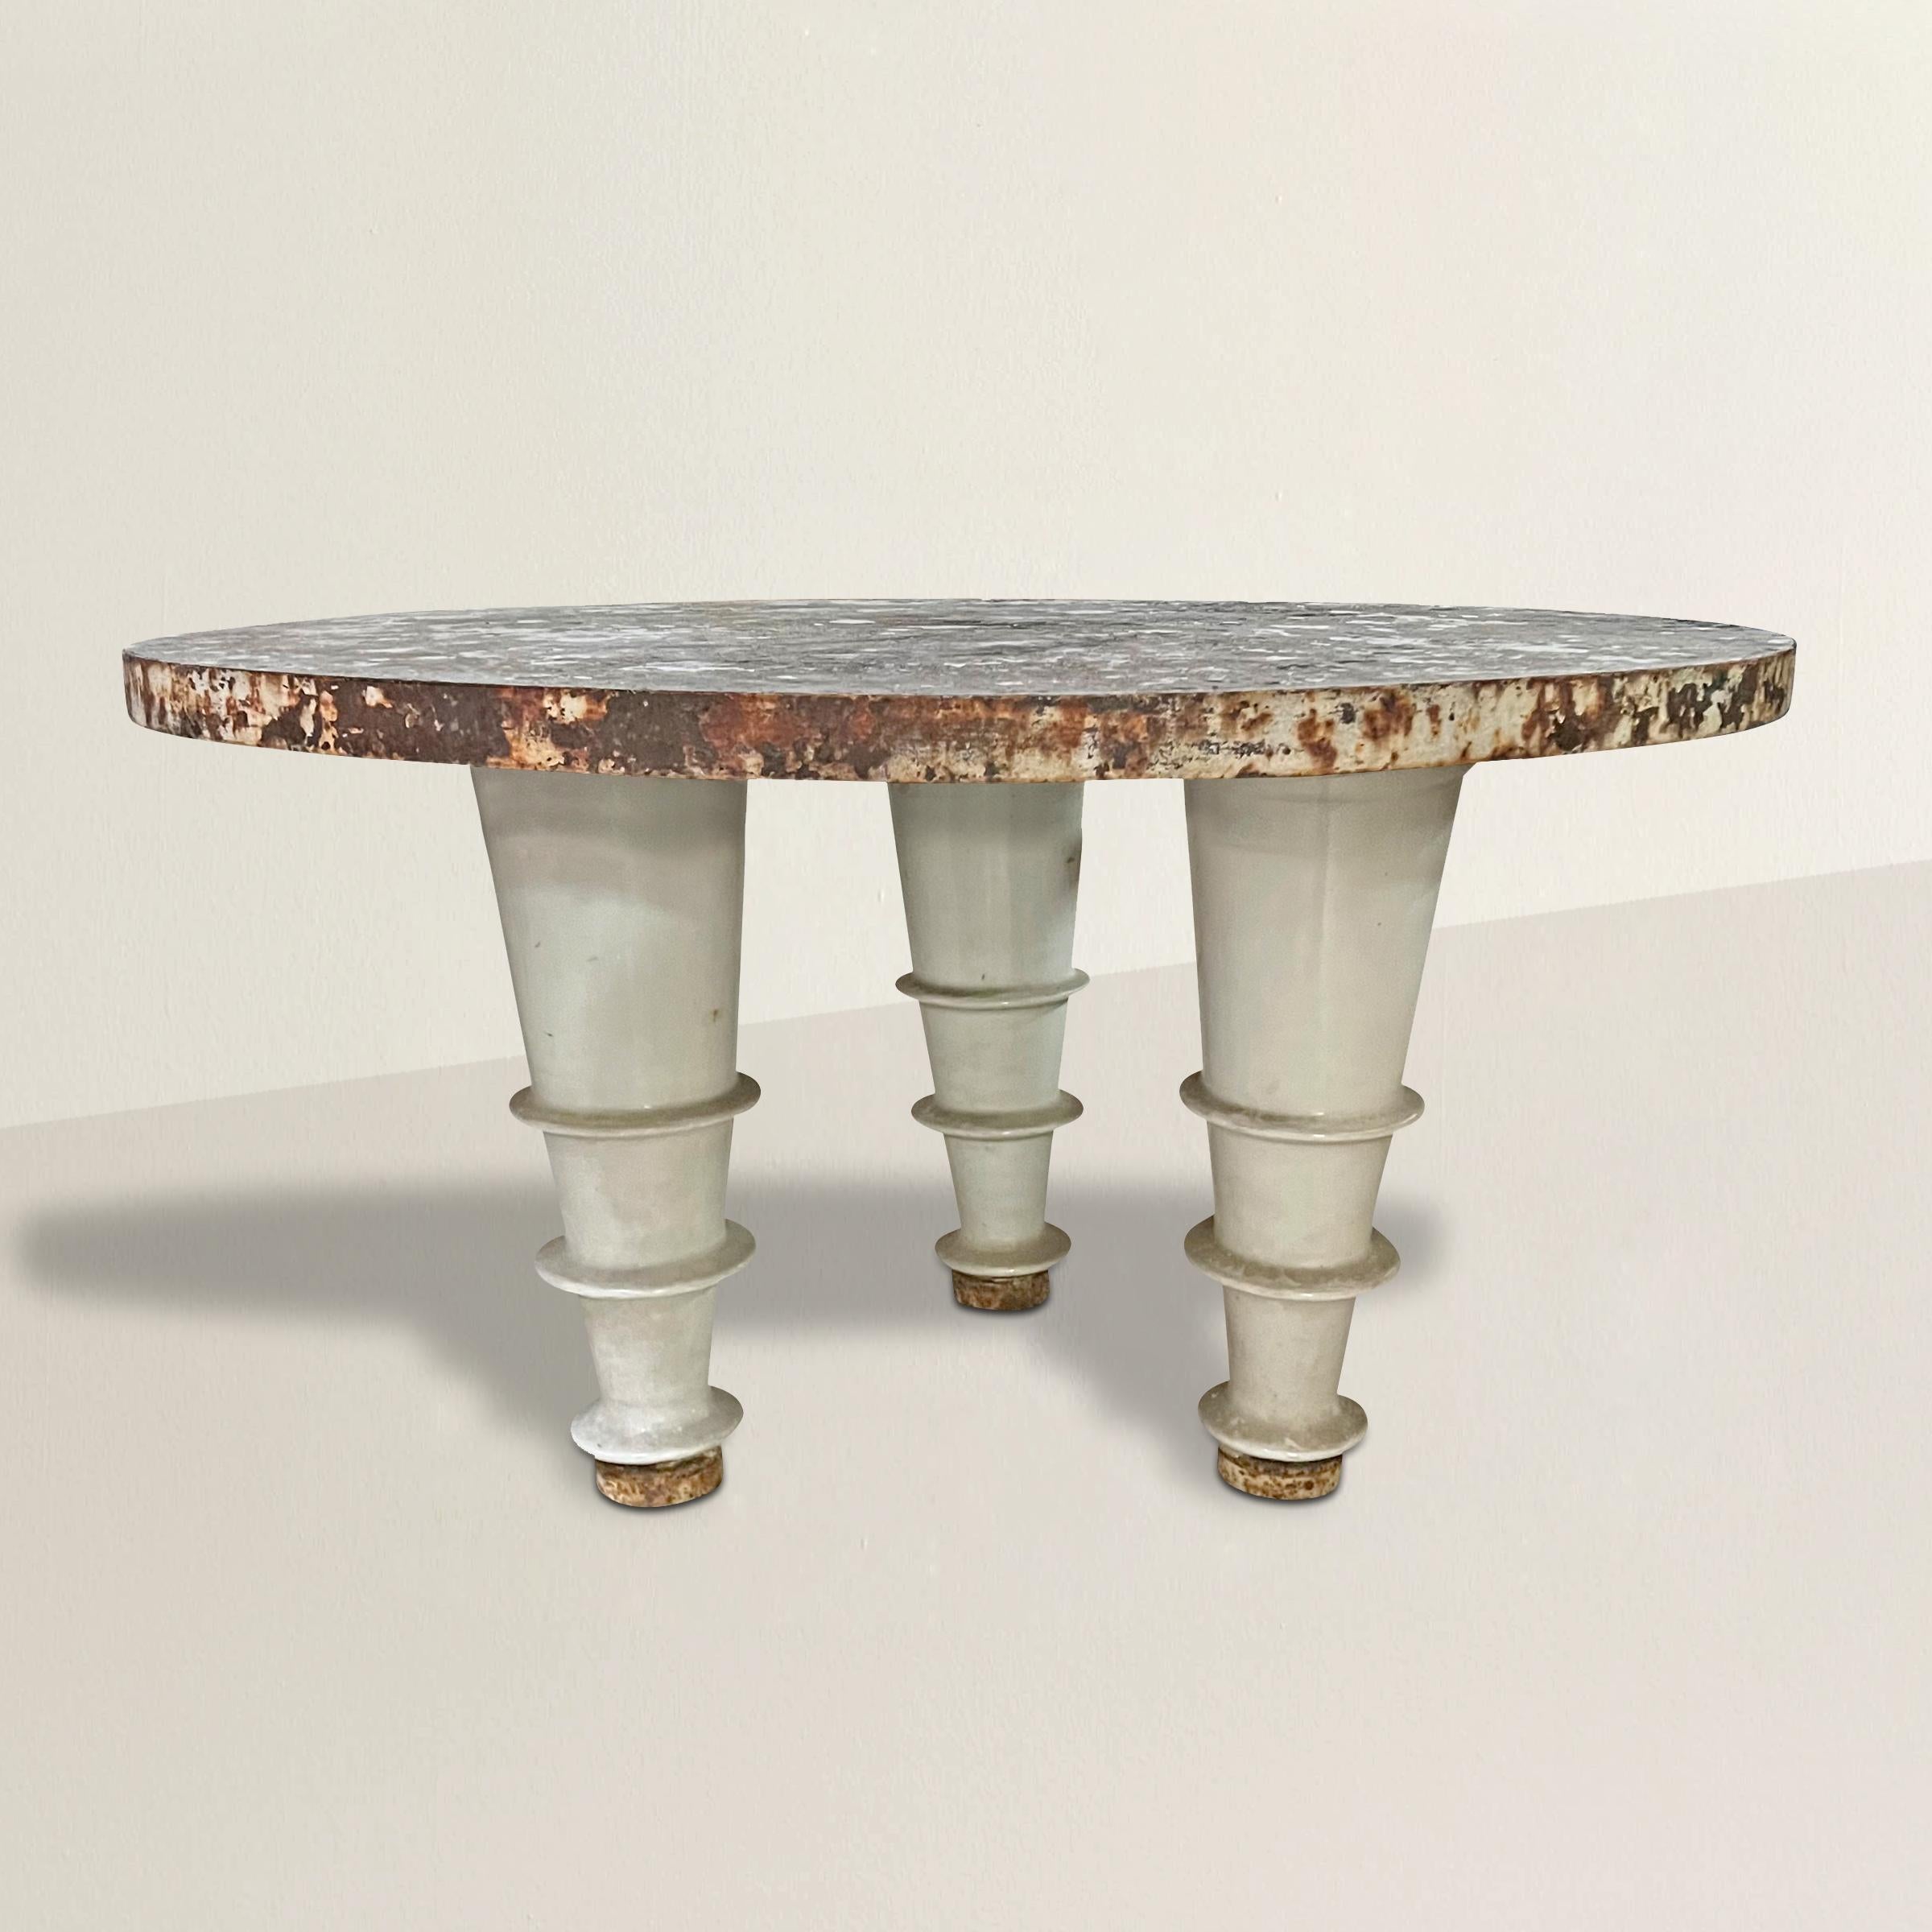 A chic and stylish early 20th century French industrial table with an iron wrapped cement top supported by three porcelain enameled iron legs.  Such a great center table in your loft apartment, but also works beautifully in your garden or on your